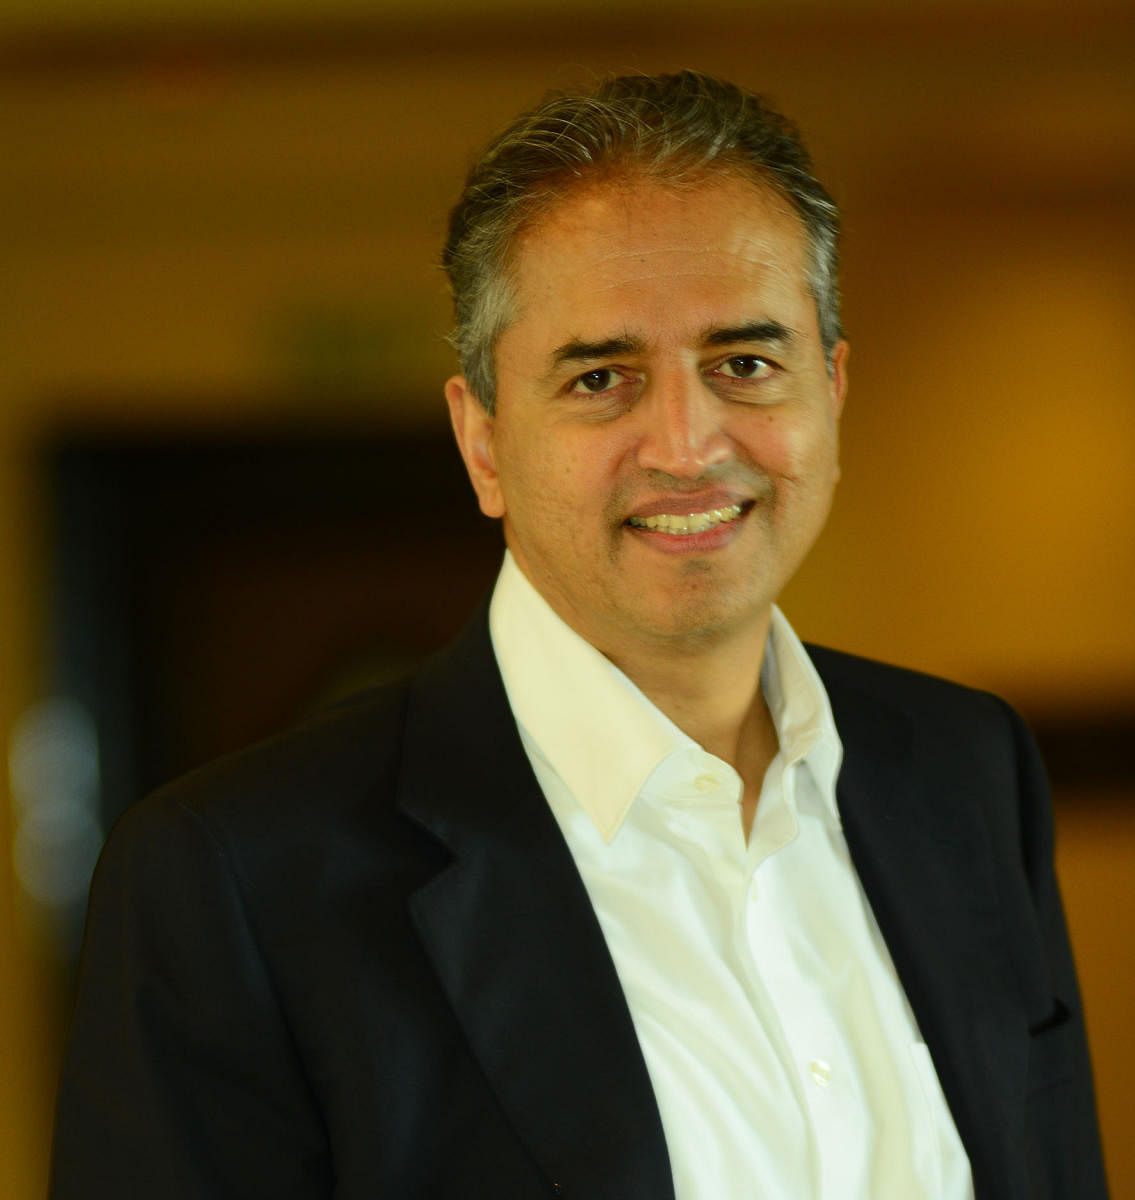 Devi Shetty, chairman and executive director of Narayana Health, said providing safe-spaces, with proper medical care to enable patients to isolate themselves, will play a big role in India's fight against COVID-19. (DH Photo)